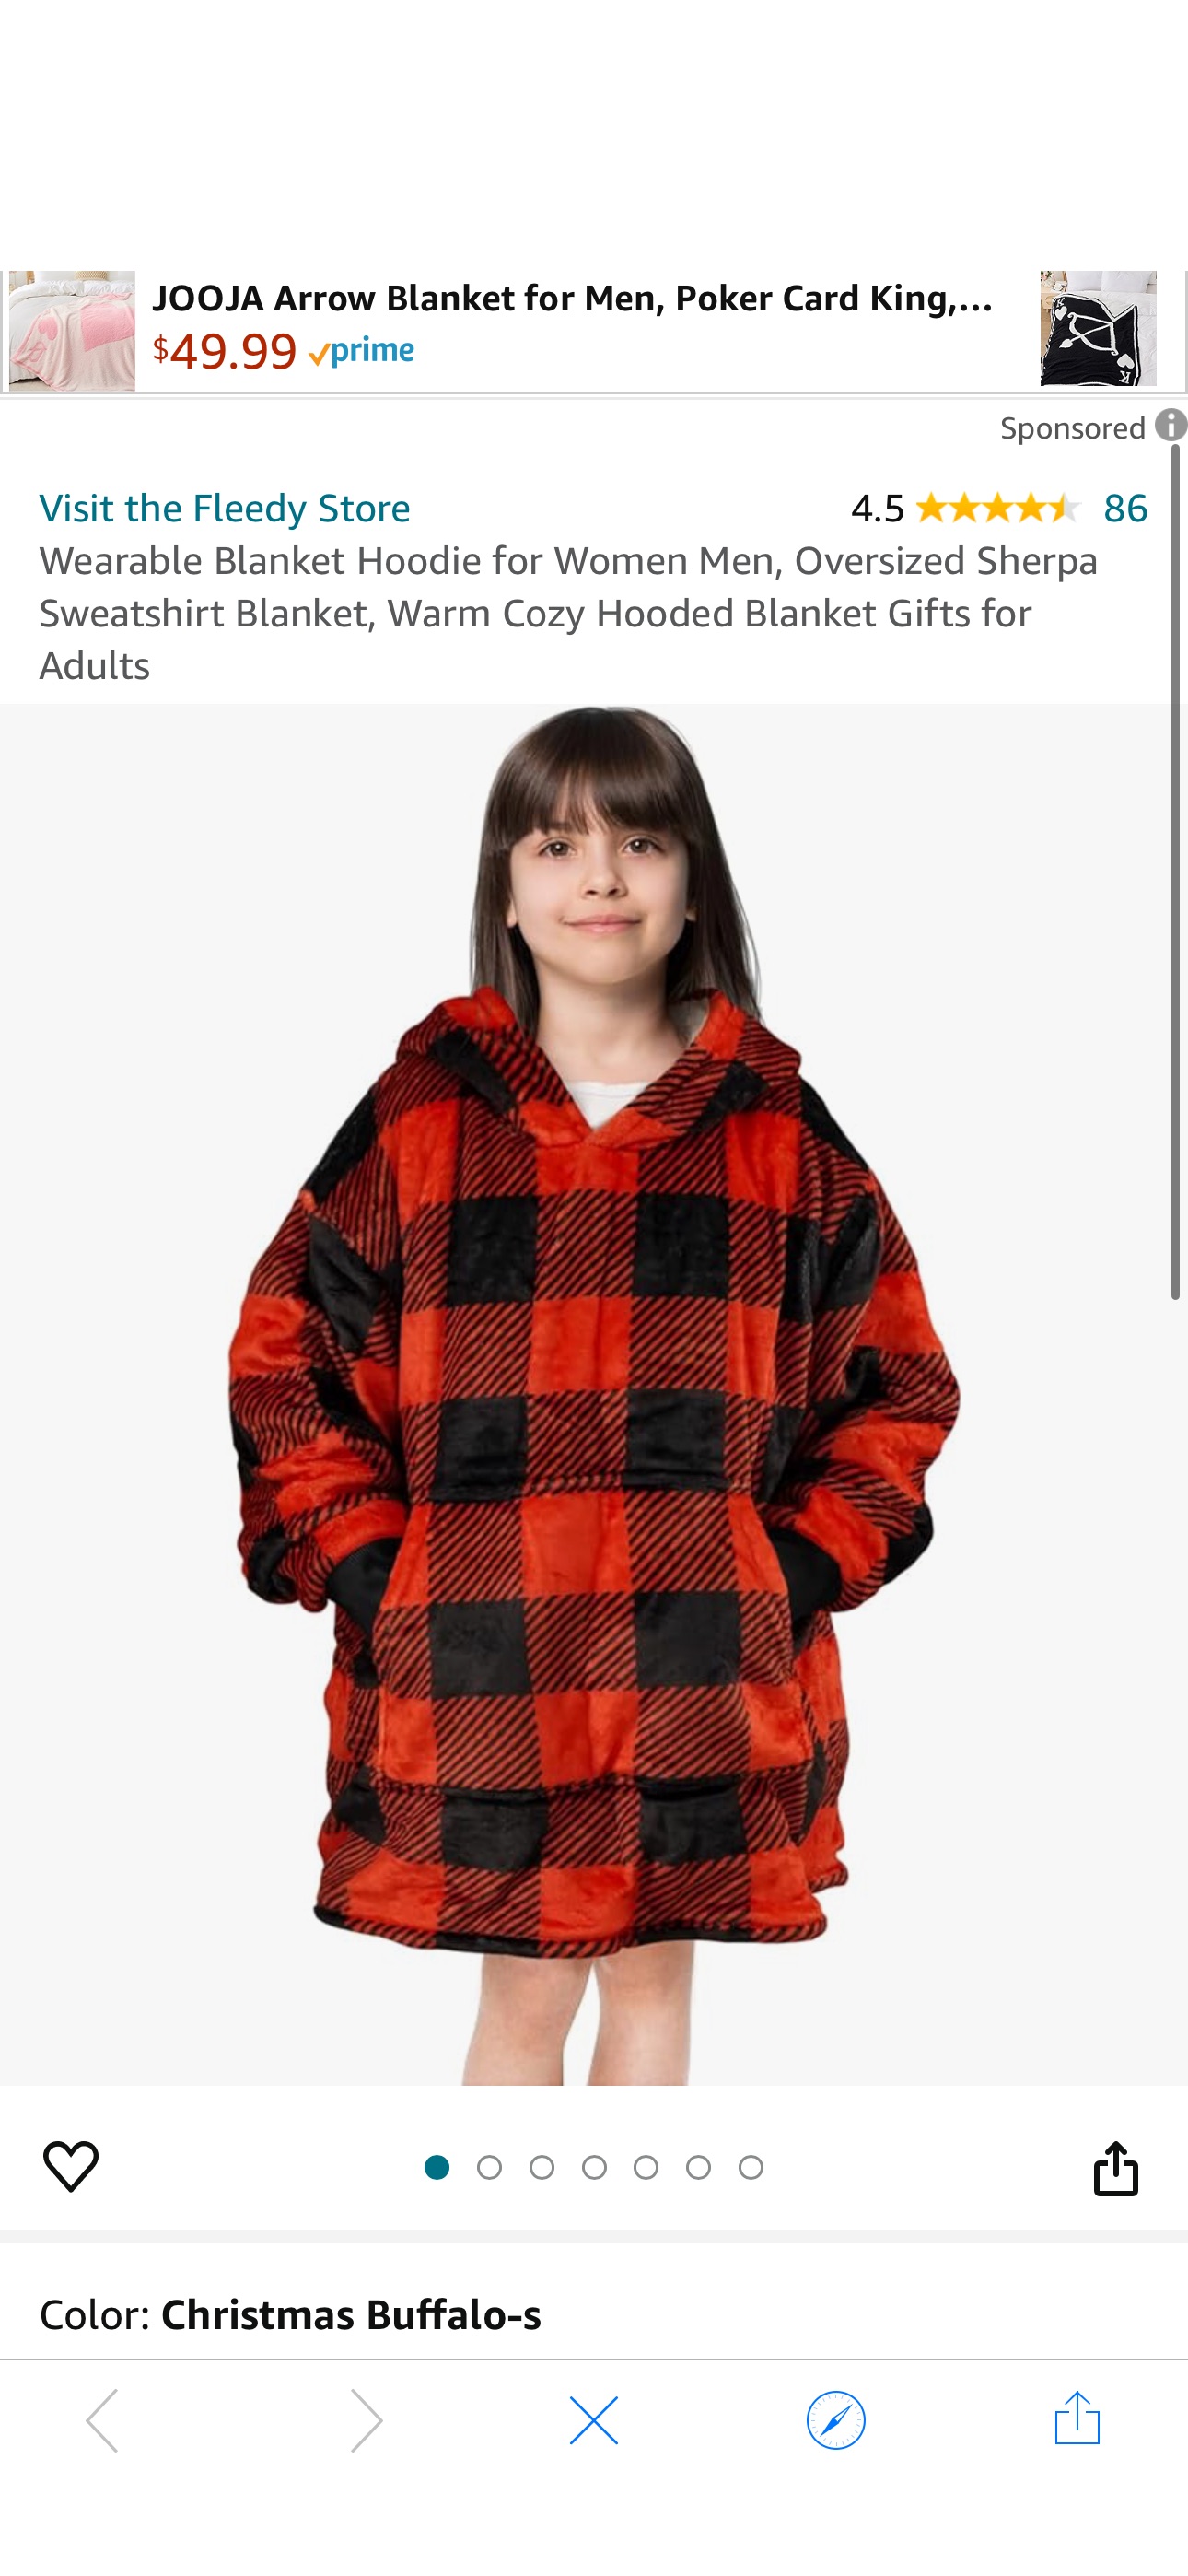 Amazon.com: Christmas Wearable Blanket Kids Sherpa Blanket Hoodie for Kids, Warm Cozy Oversized Hooded Blanket Gifts for Girls Boys 6-10YR (Red) : Home & Kitchen